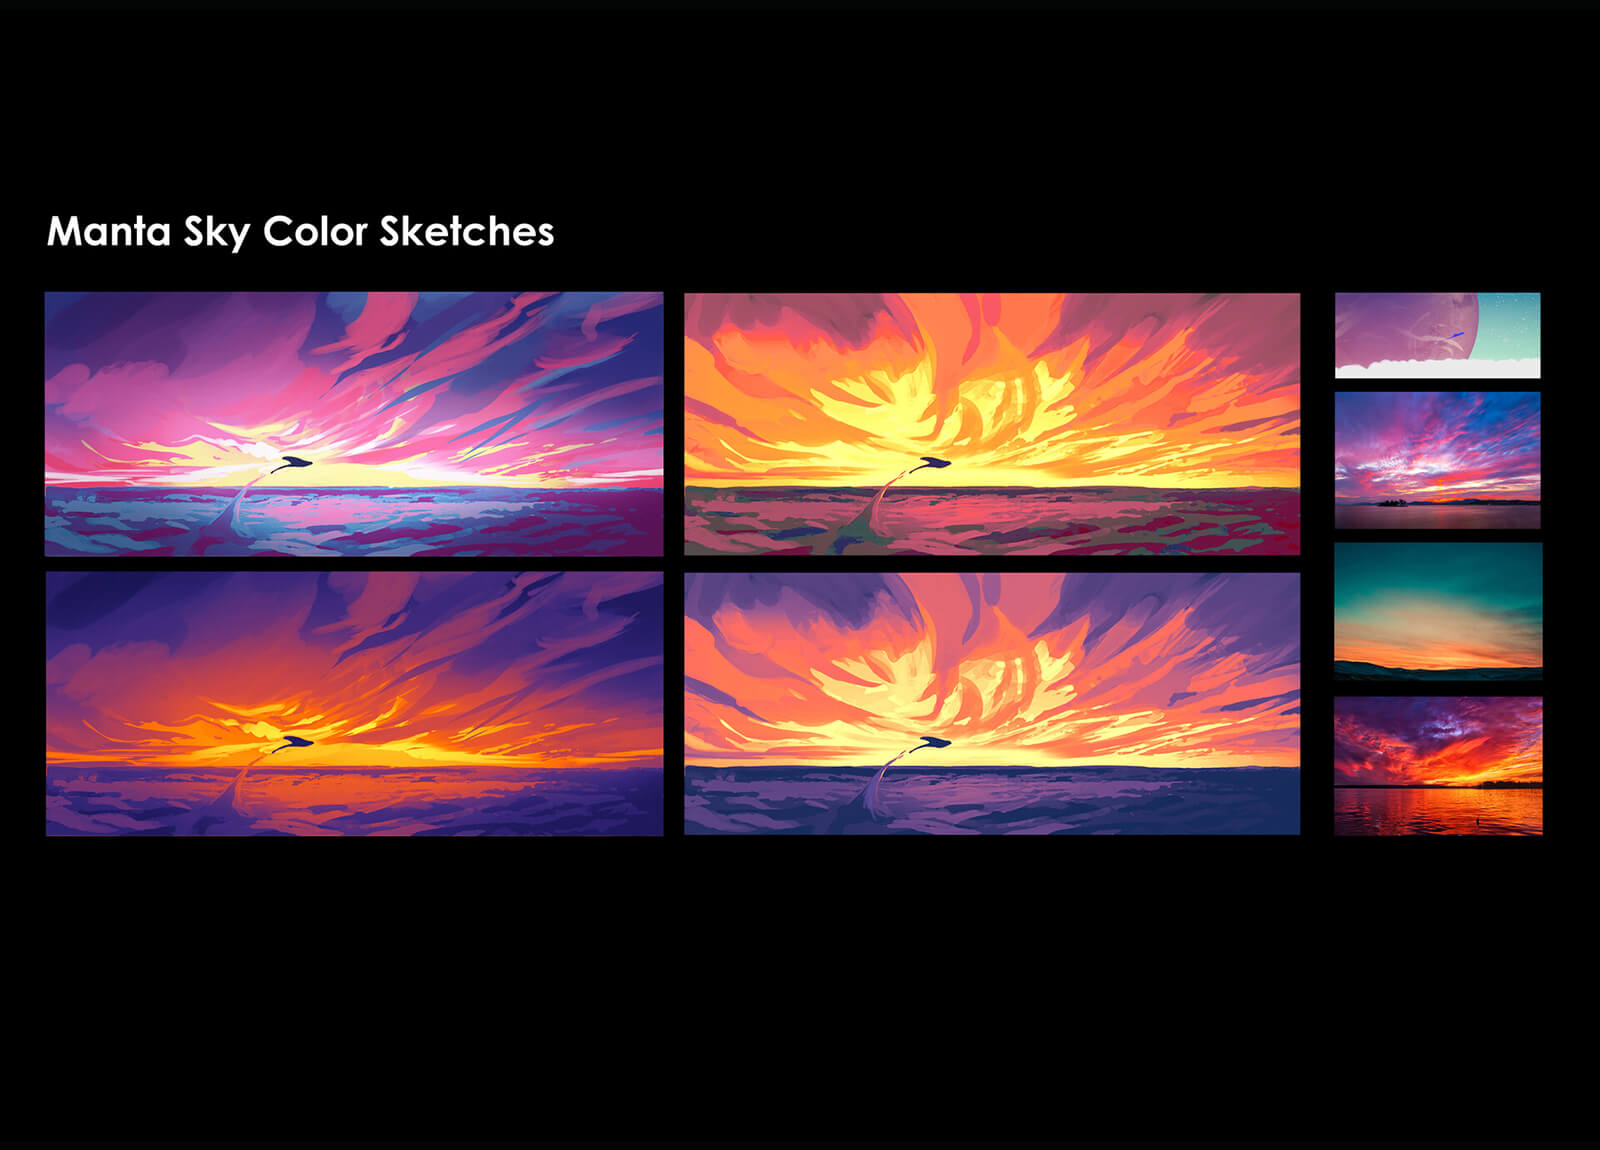 Color sketches of the manta creature flying across a cloudy sky at sunset.